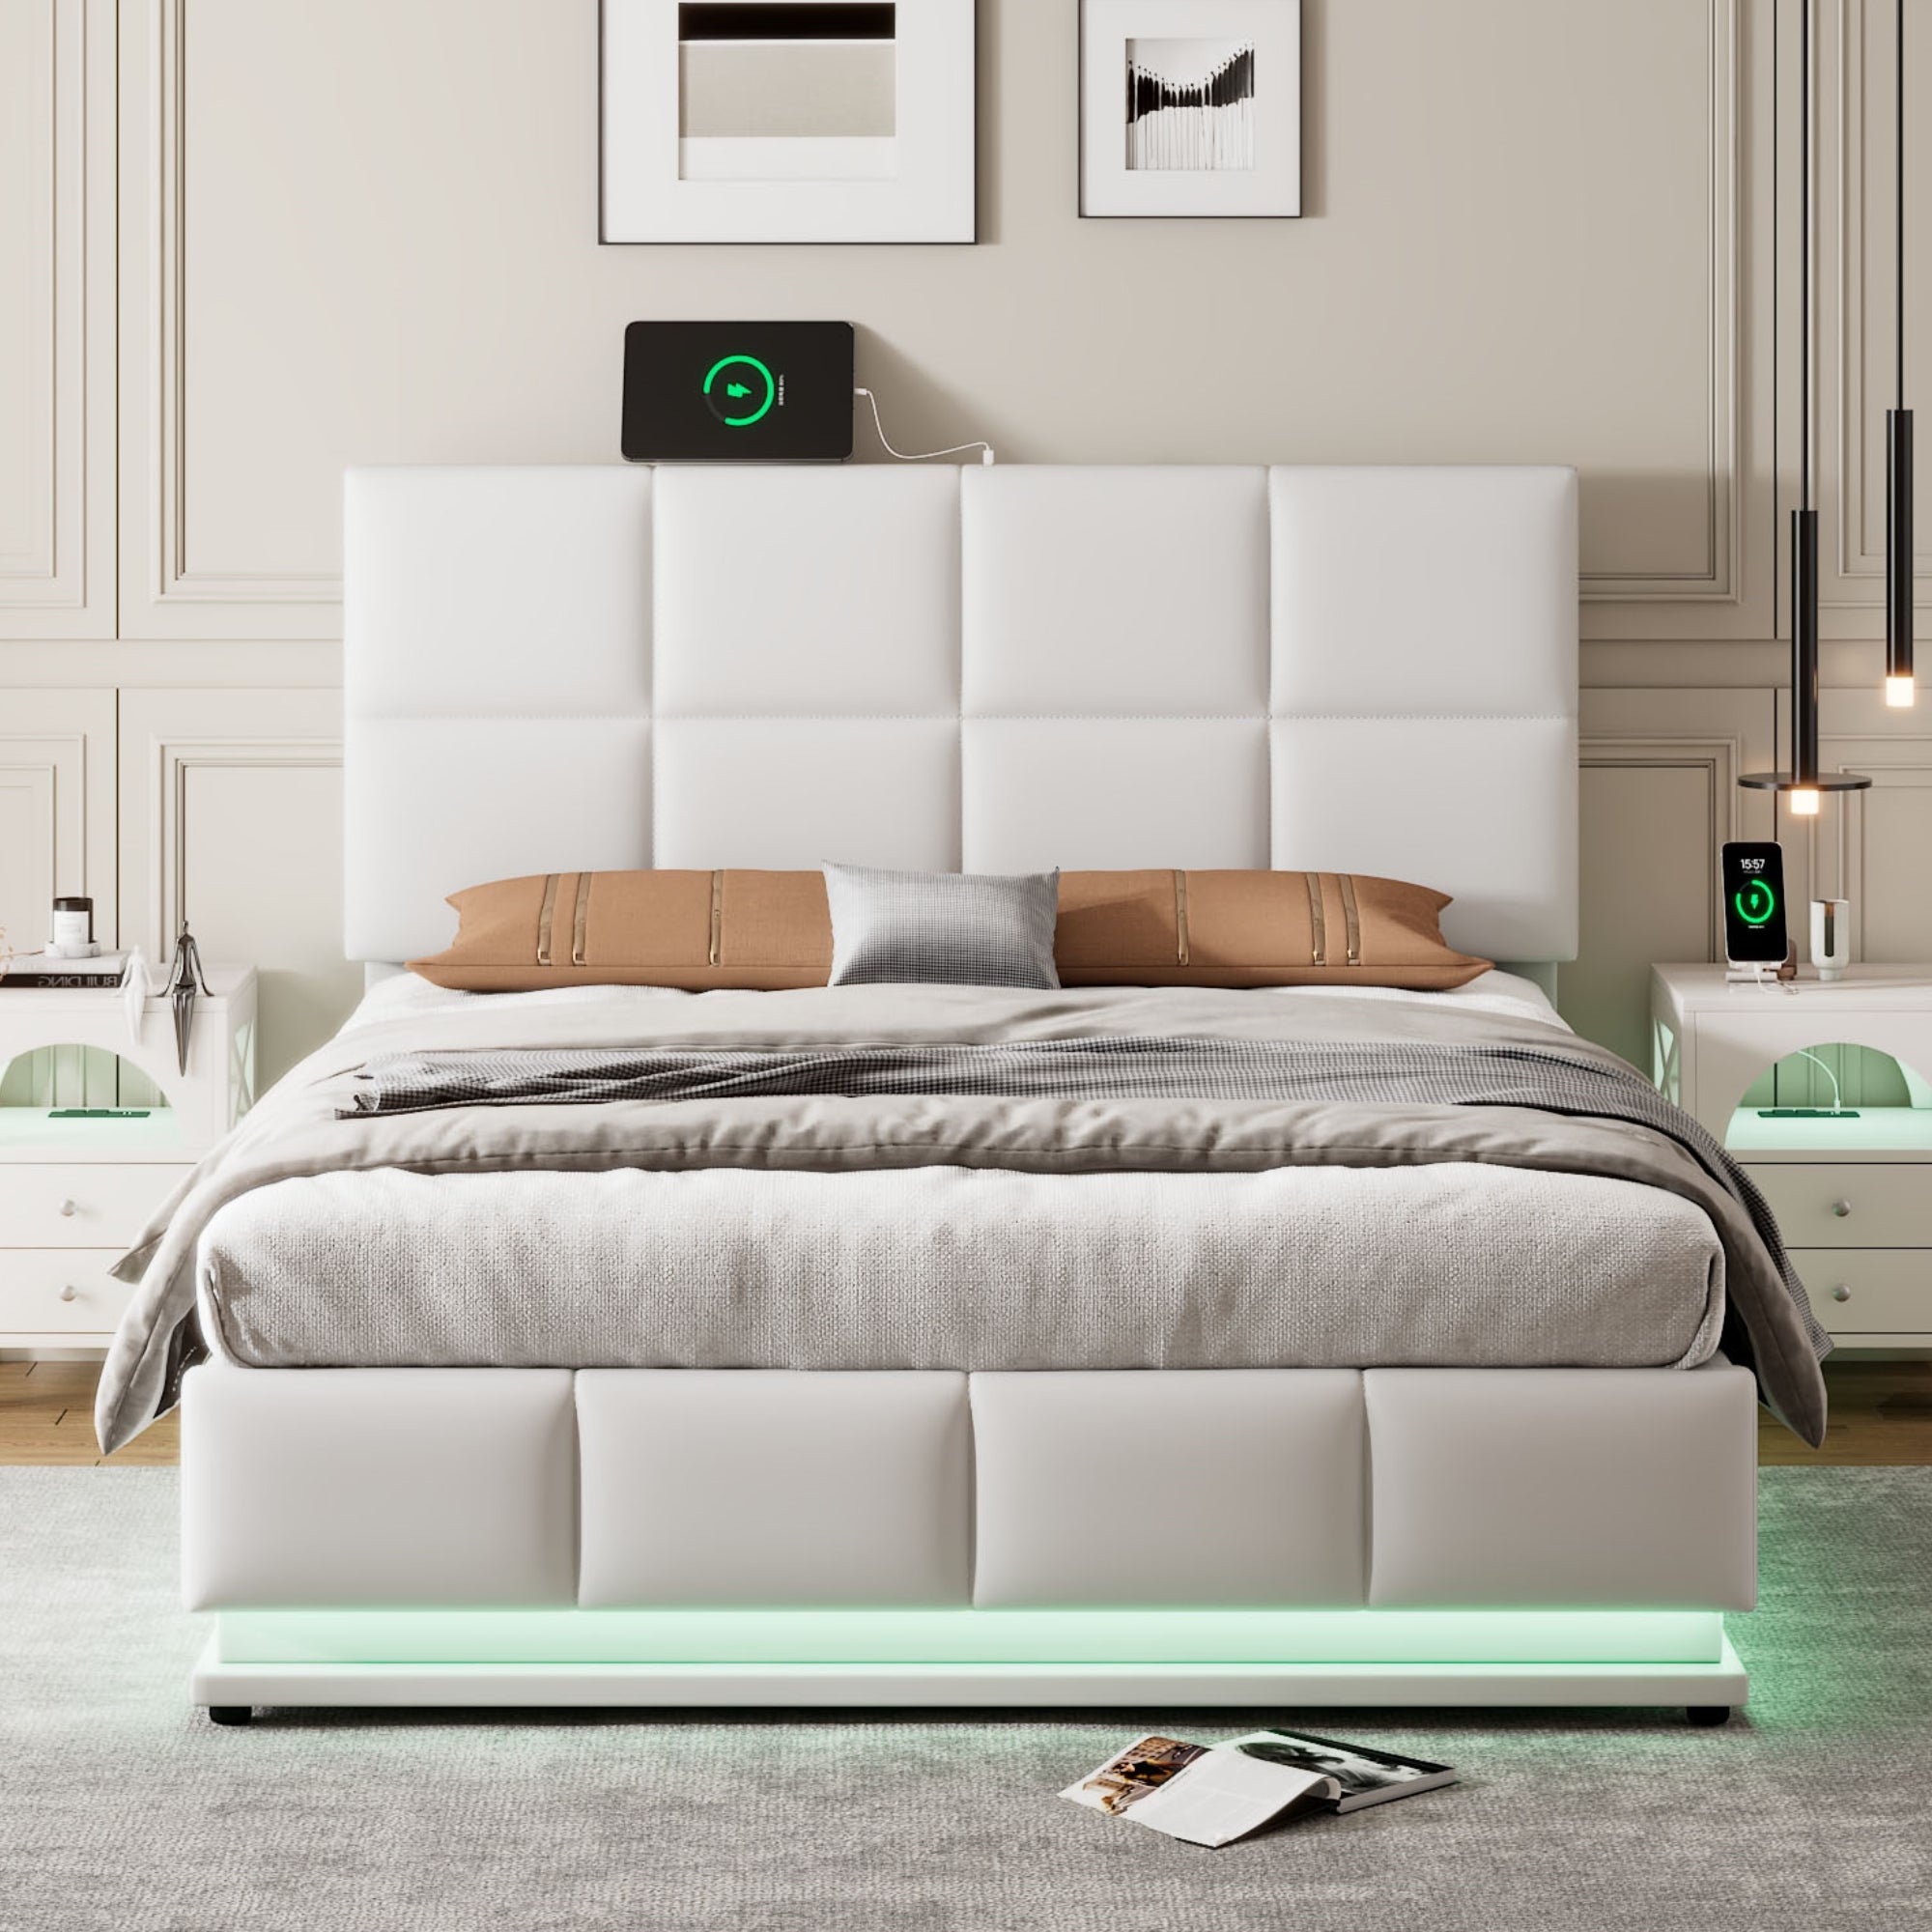 Bellemave Tufted Upholstered Platform Bed with Hydraulic Storage System,PU Storage Bed with LED Lights and USB charger